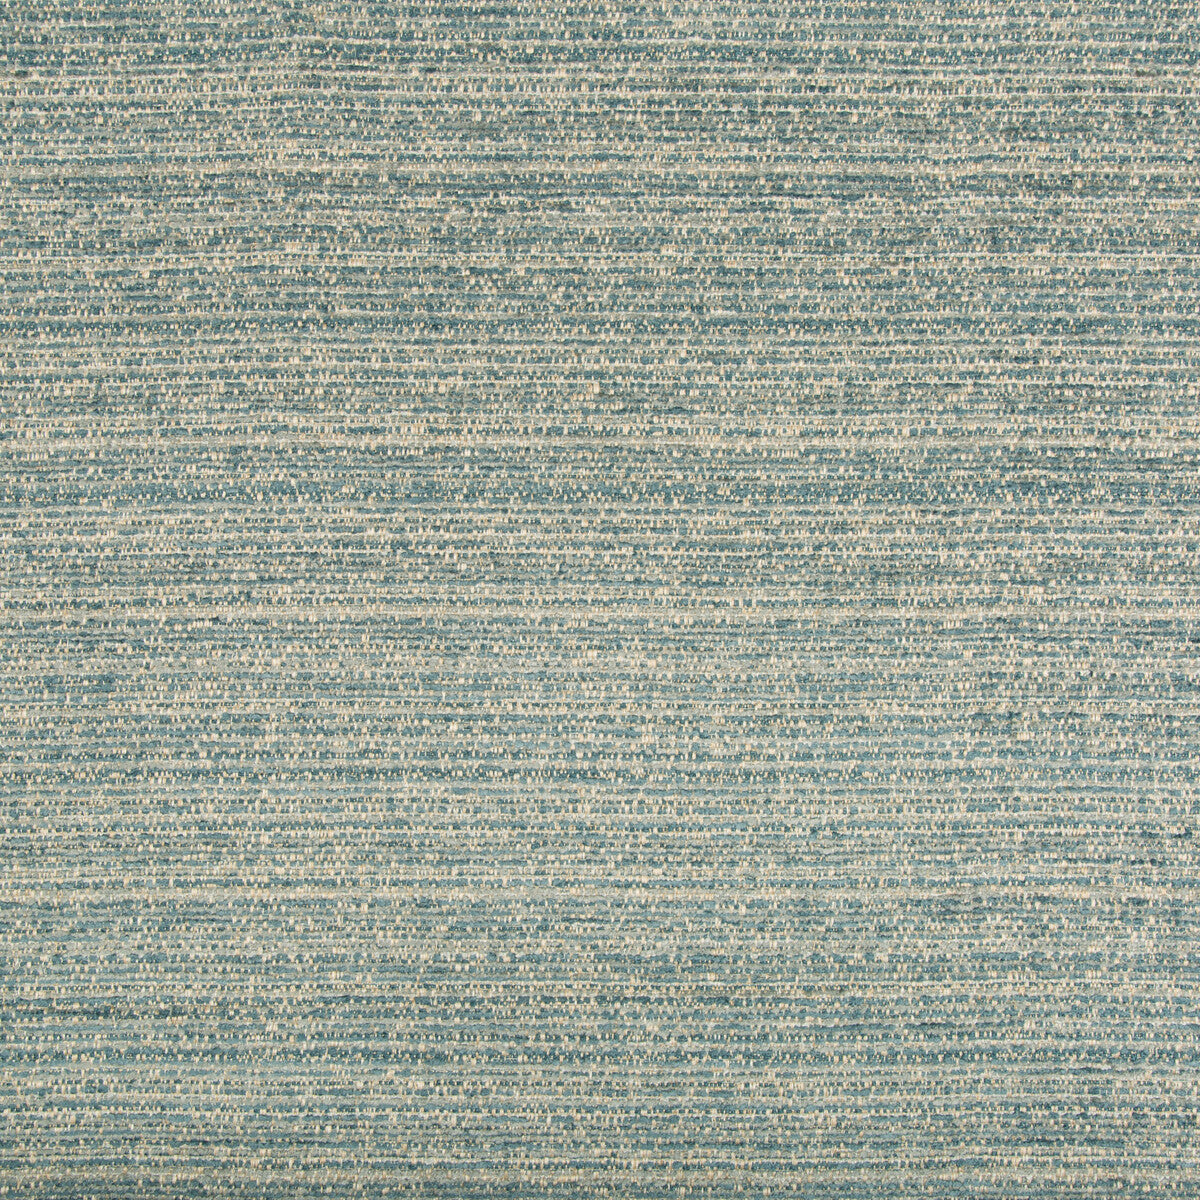 Kravet Design fabric in 34995-1615 color - pattern 34995.1615.0 - by Kravet Design in the Performance Crypton Home collection